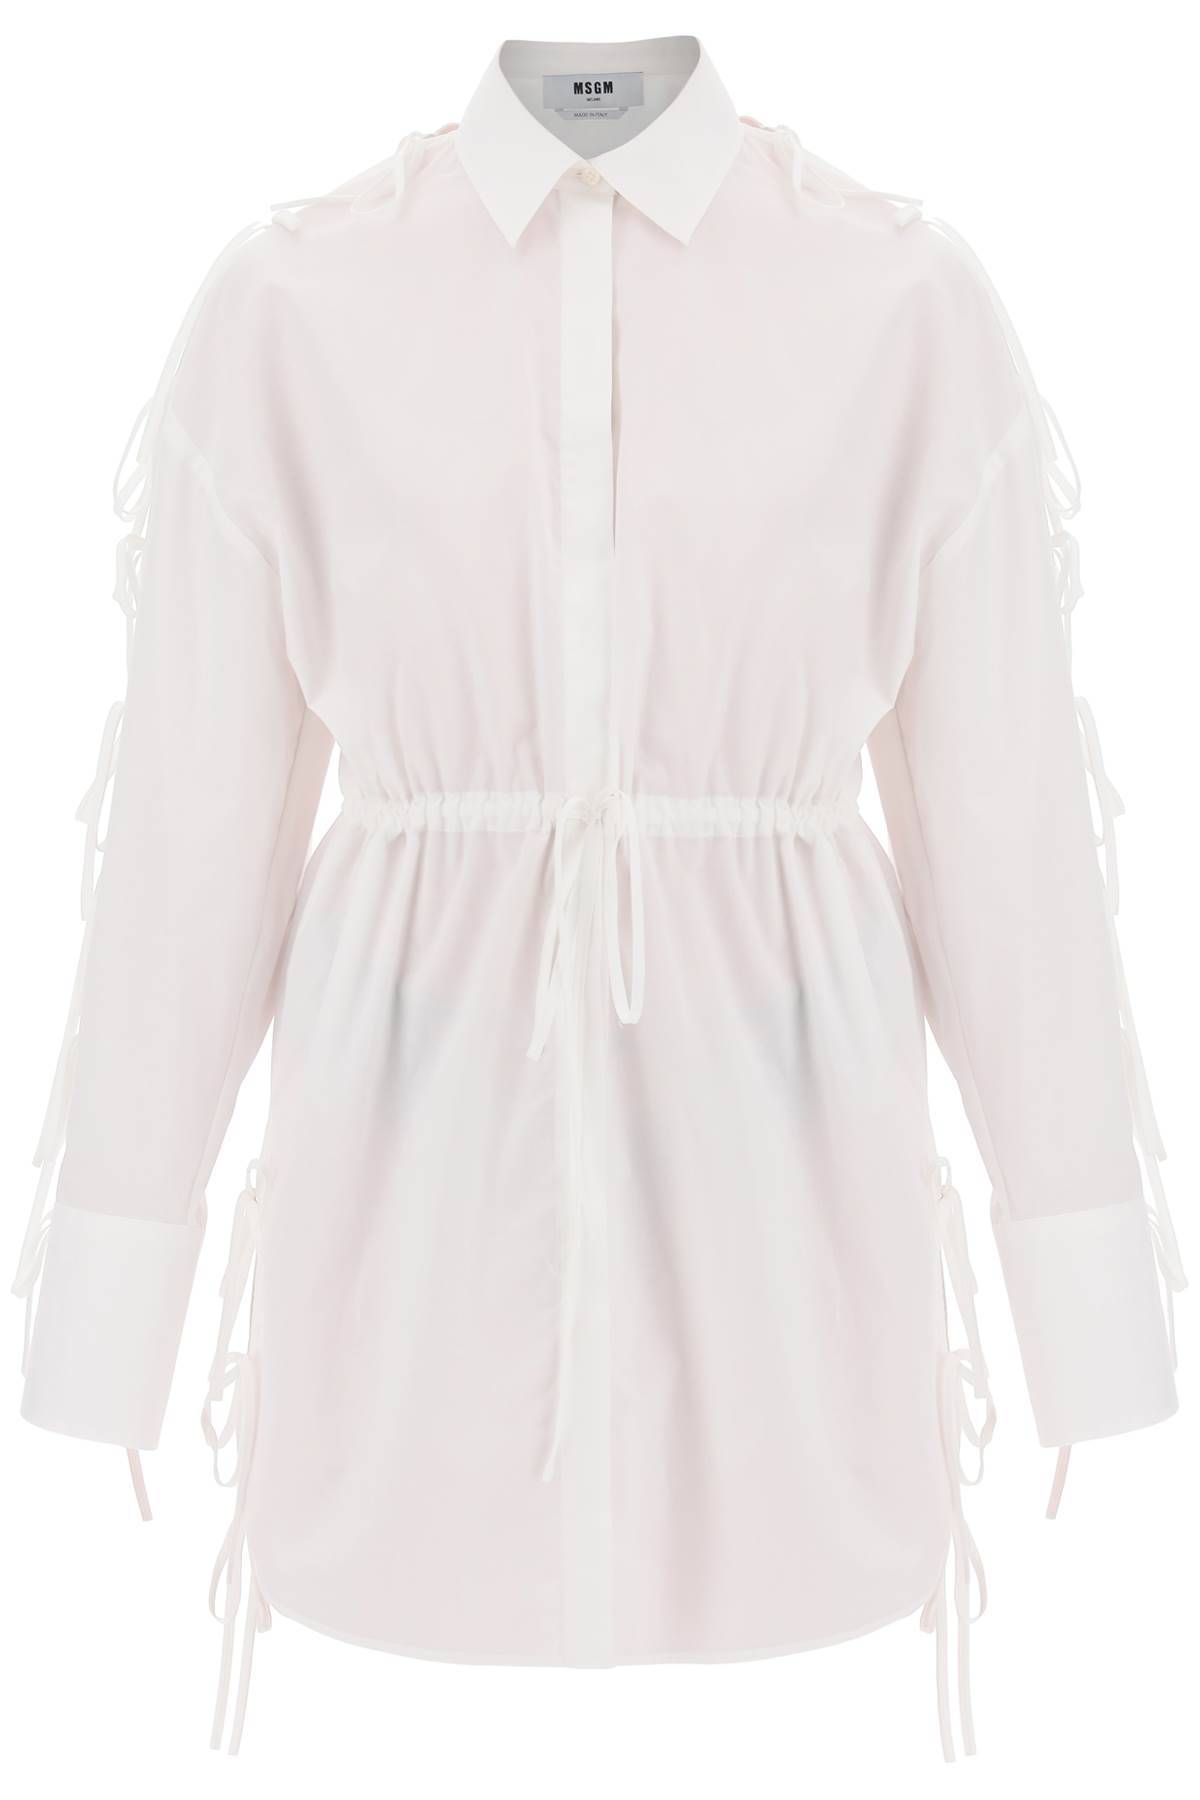 Msgm MSGM mini shirt dress with cut-outs and bows